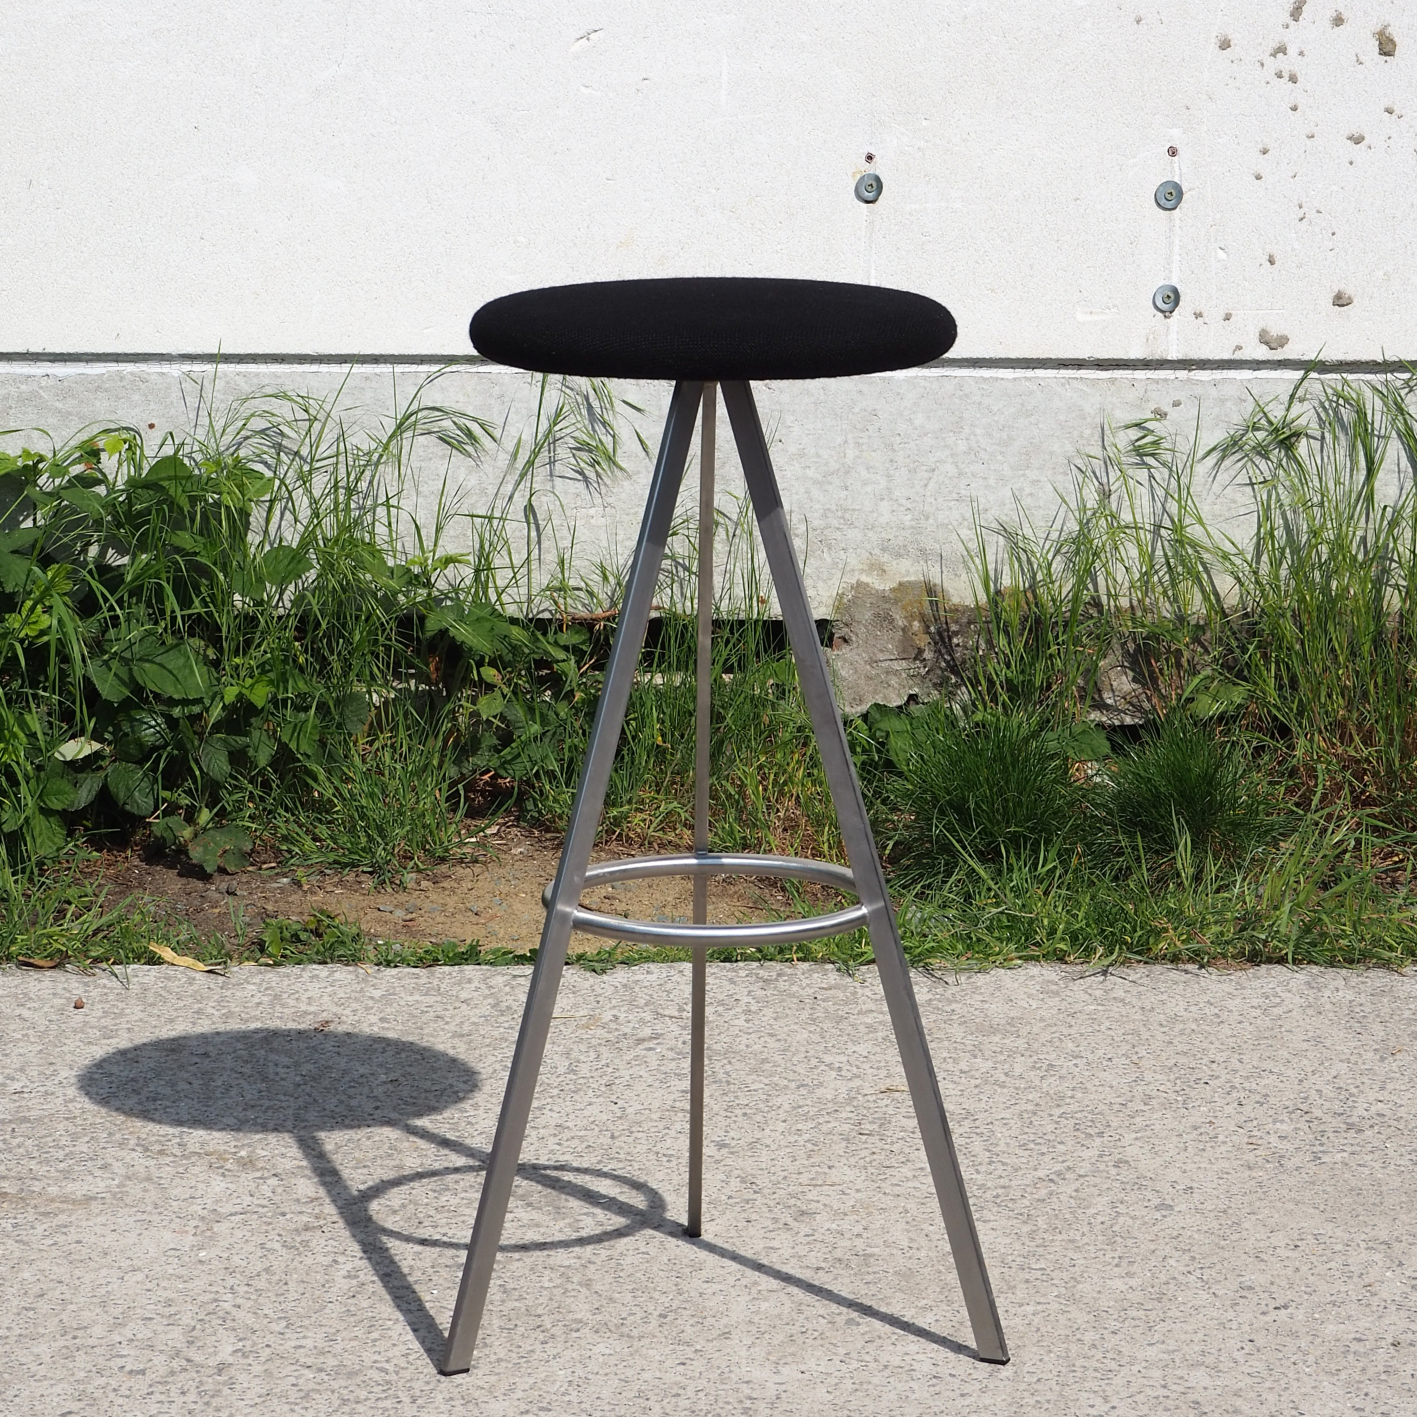 Light bar stool 'Tri-Space' by Terence Woodgate for Case